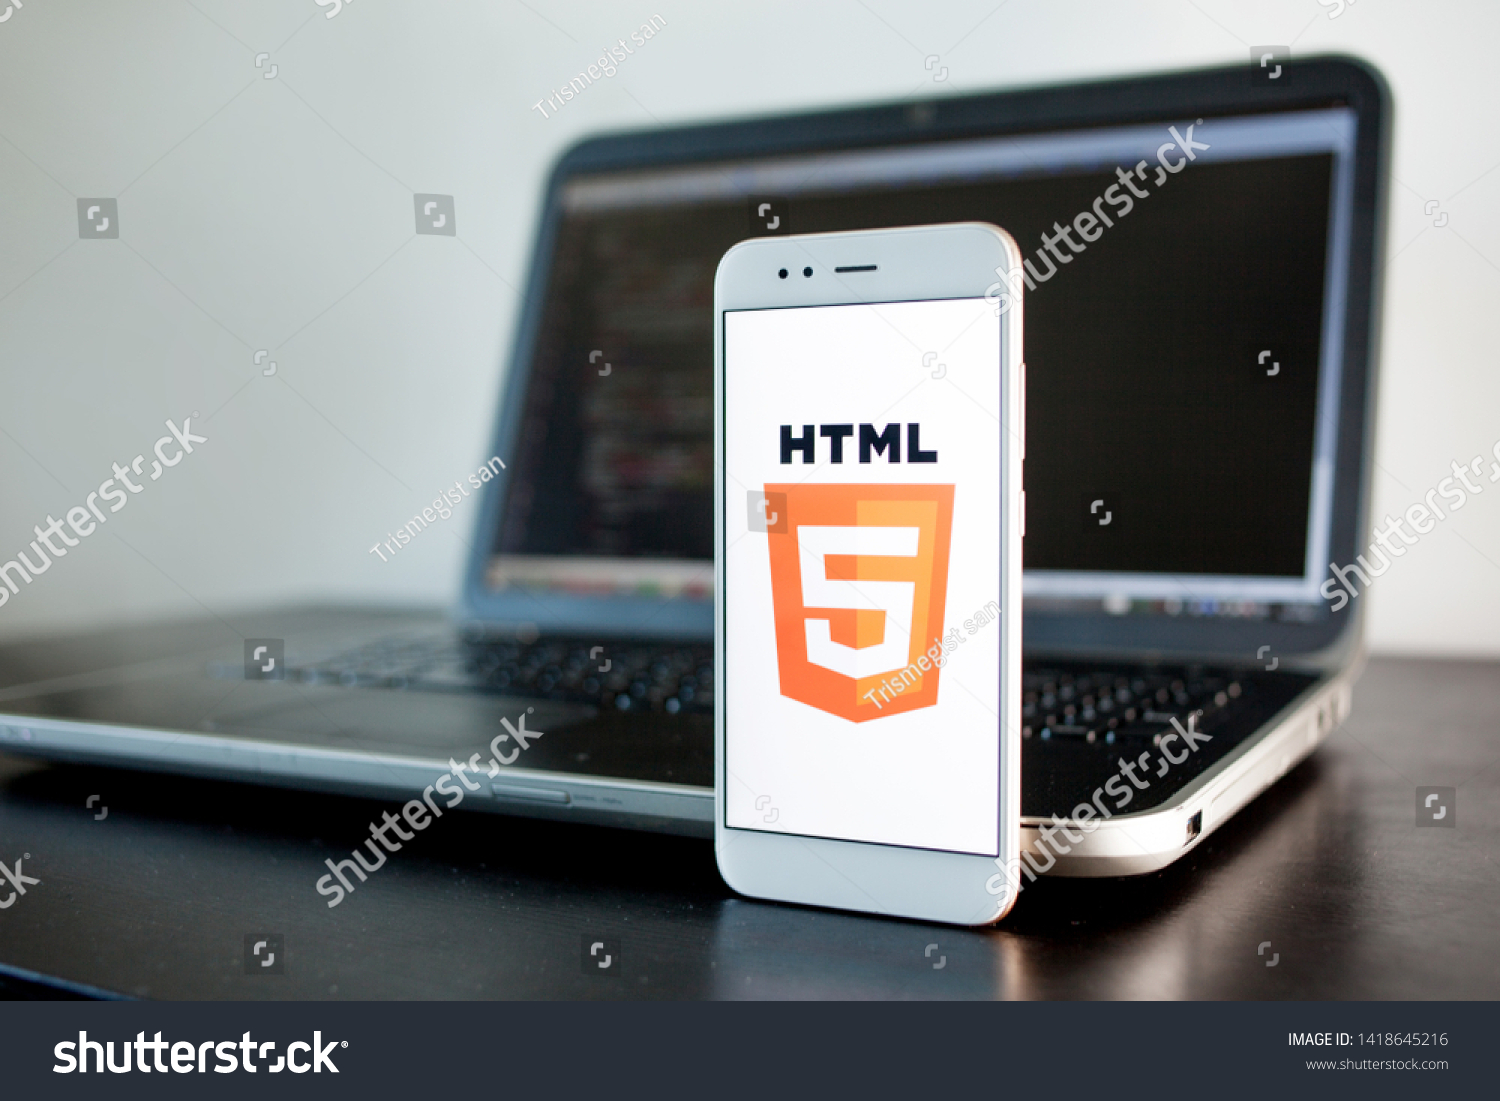 SAINT PETERSBURG, RUSSIA - MAY 16, 2019: Mobile application development, HTML5 programming language for mobile development. Workplace of programmer, tester, laptop, illustrative editorial #1418645216